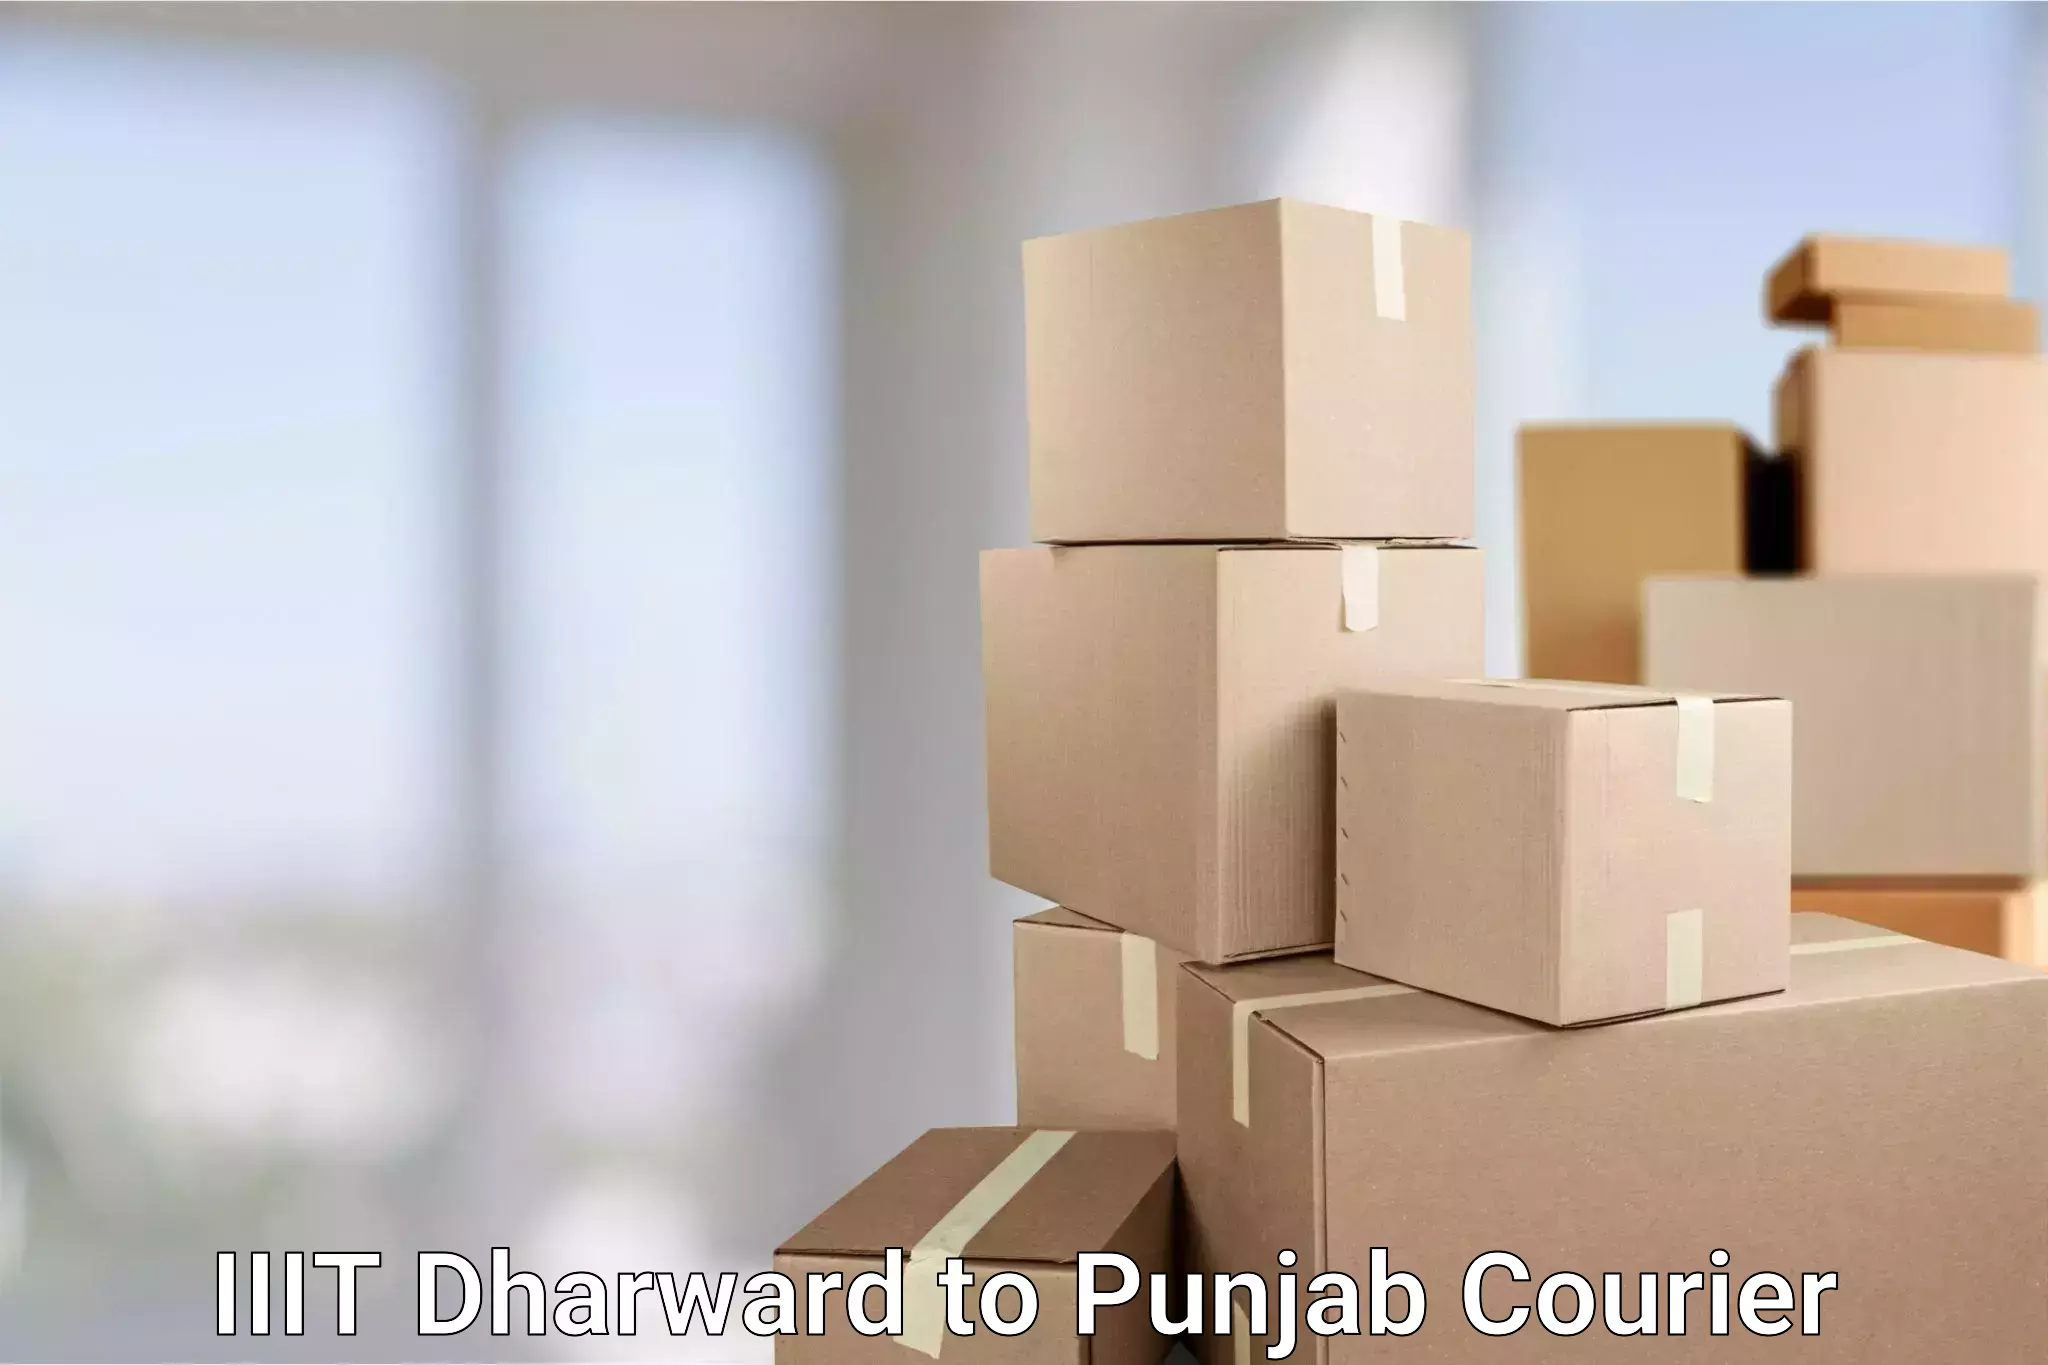 Flexible parcel services in IIIT Dharward to Punjab